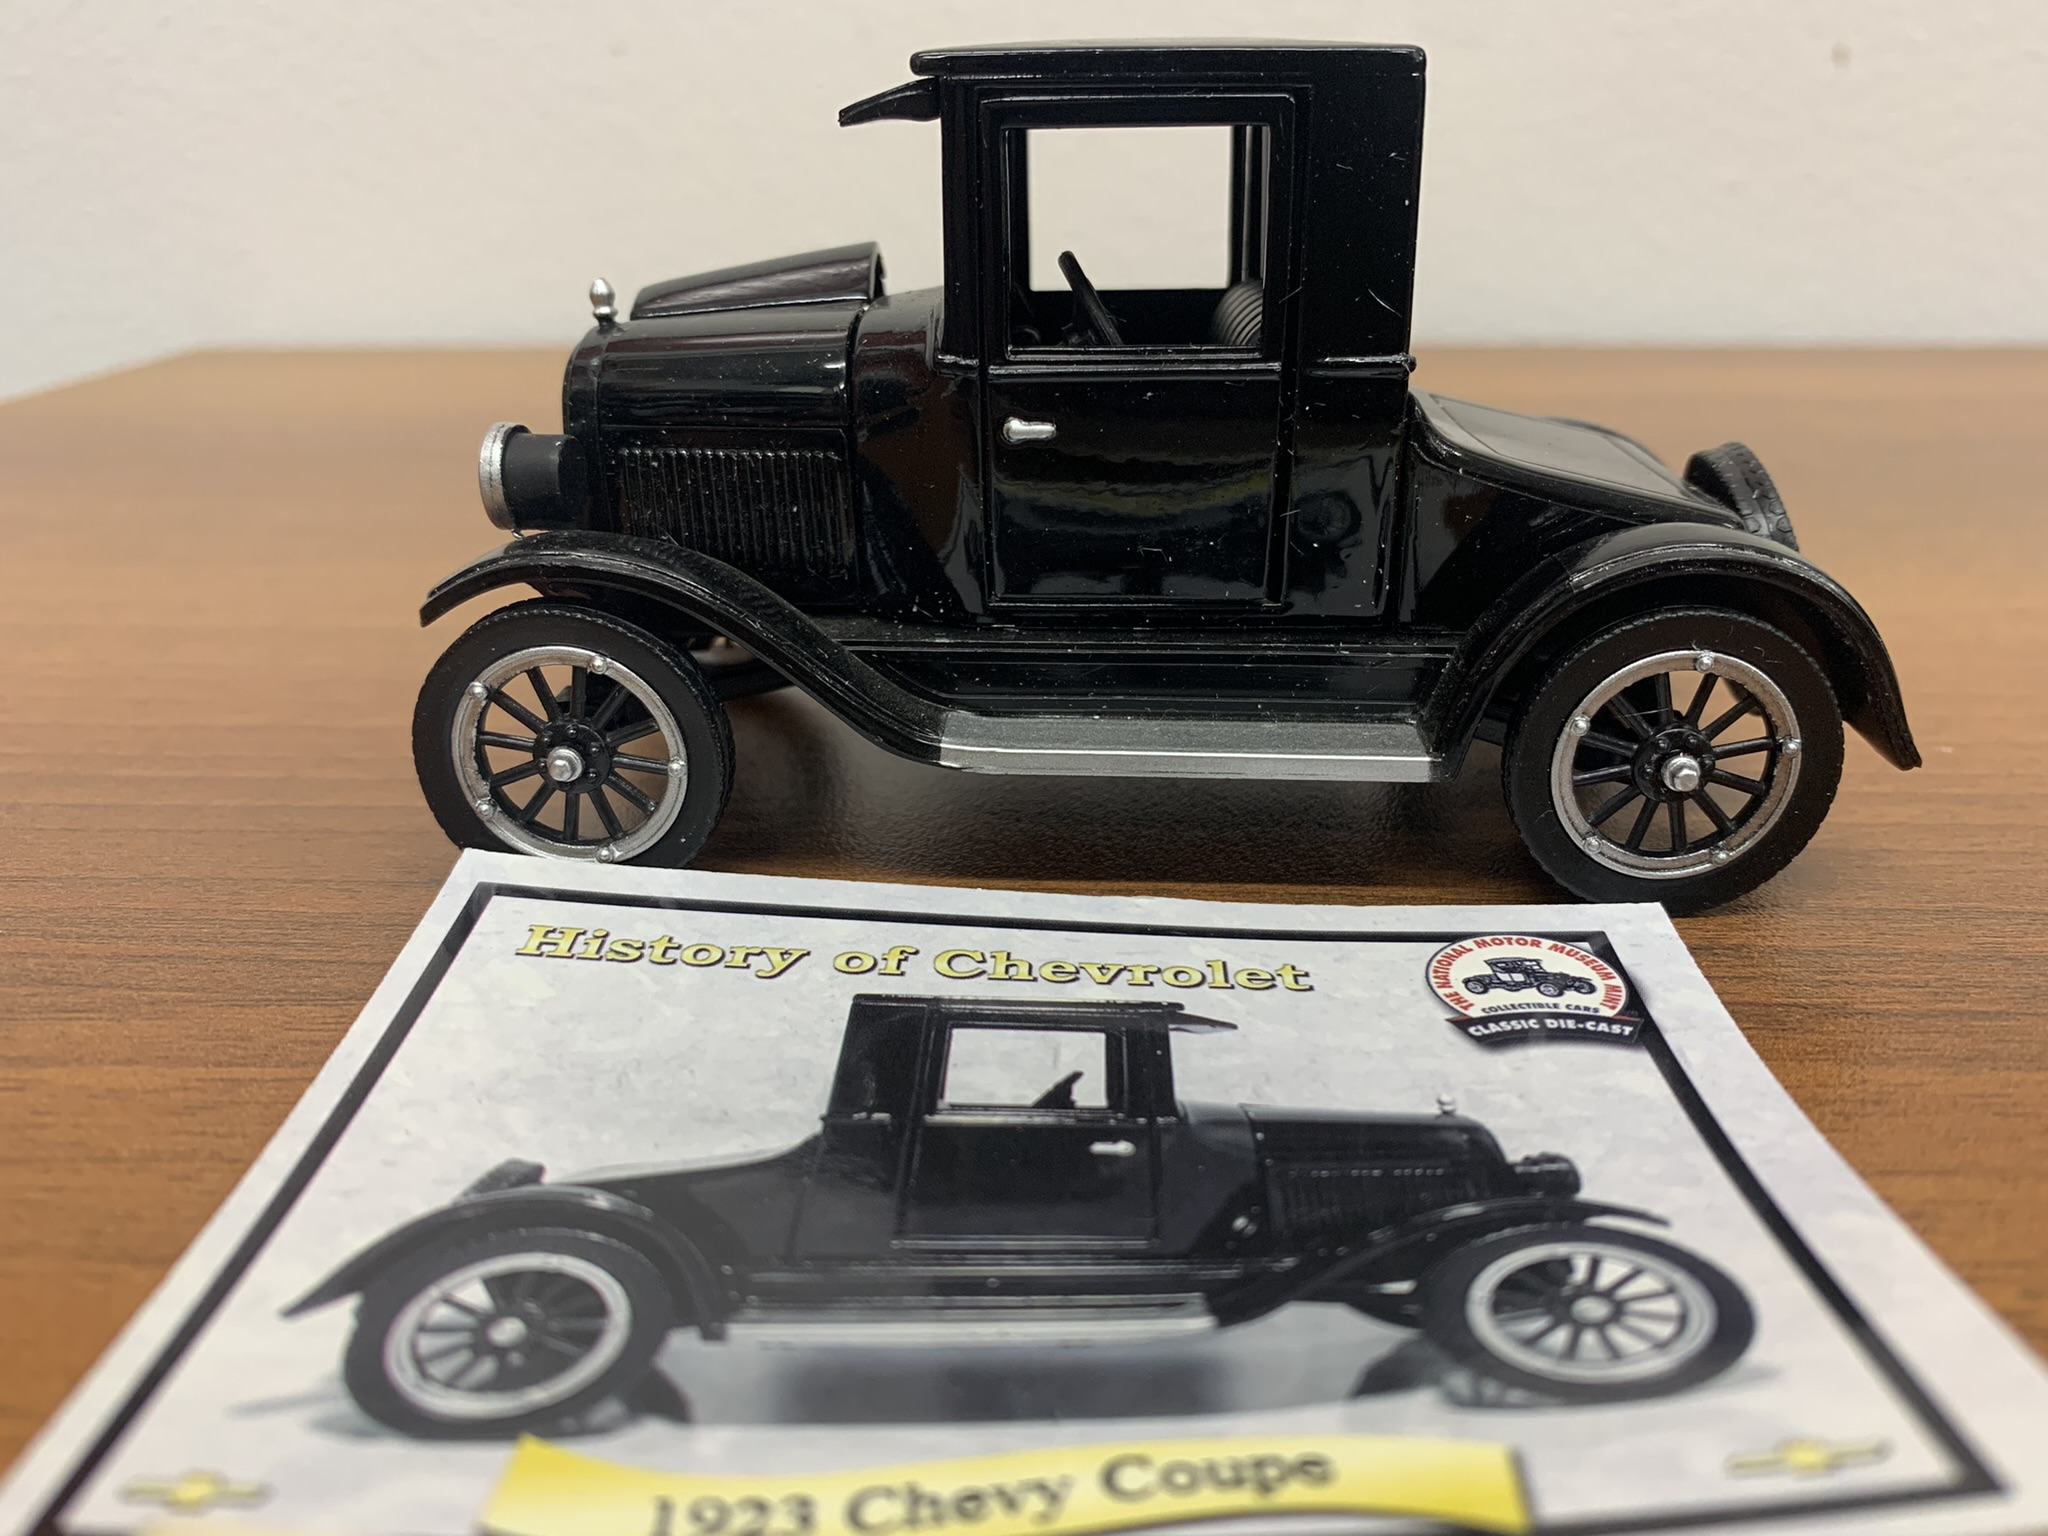 1923 Chevrolet Coupe 1:32 Scale diecast car